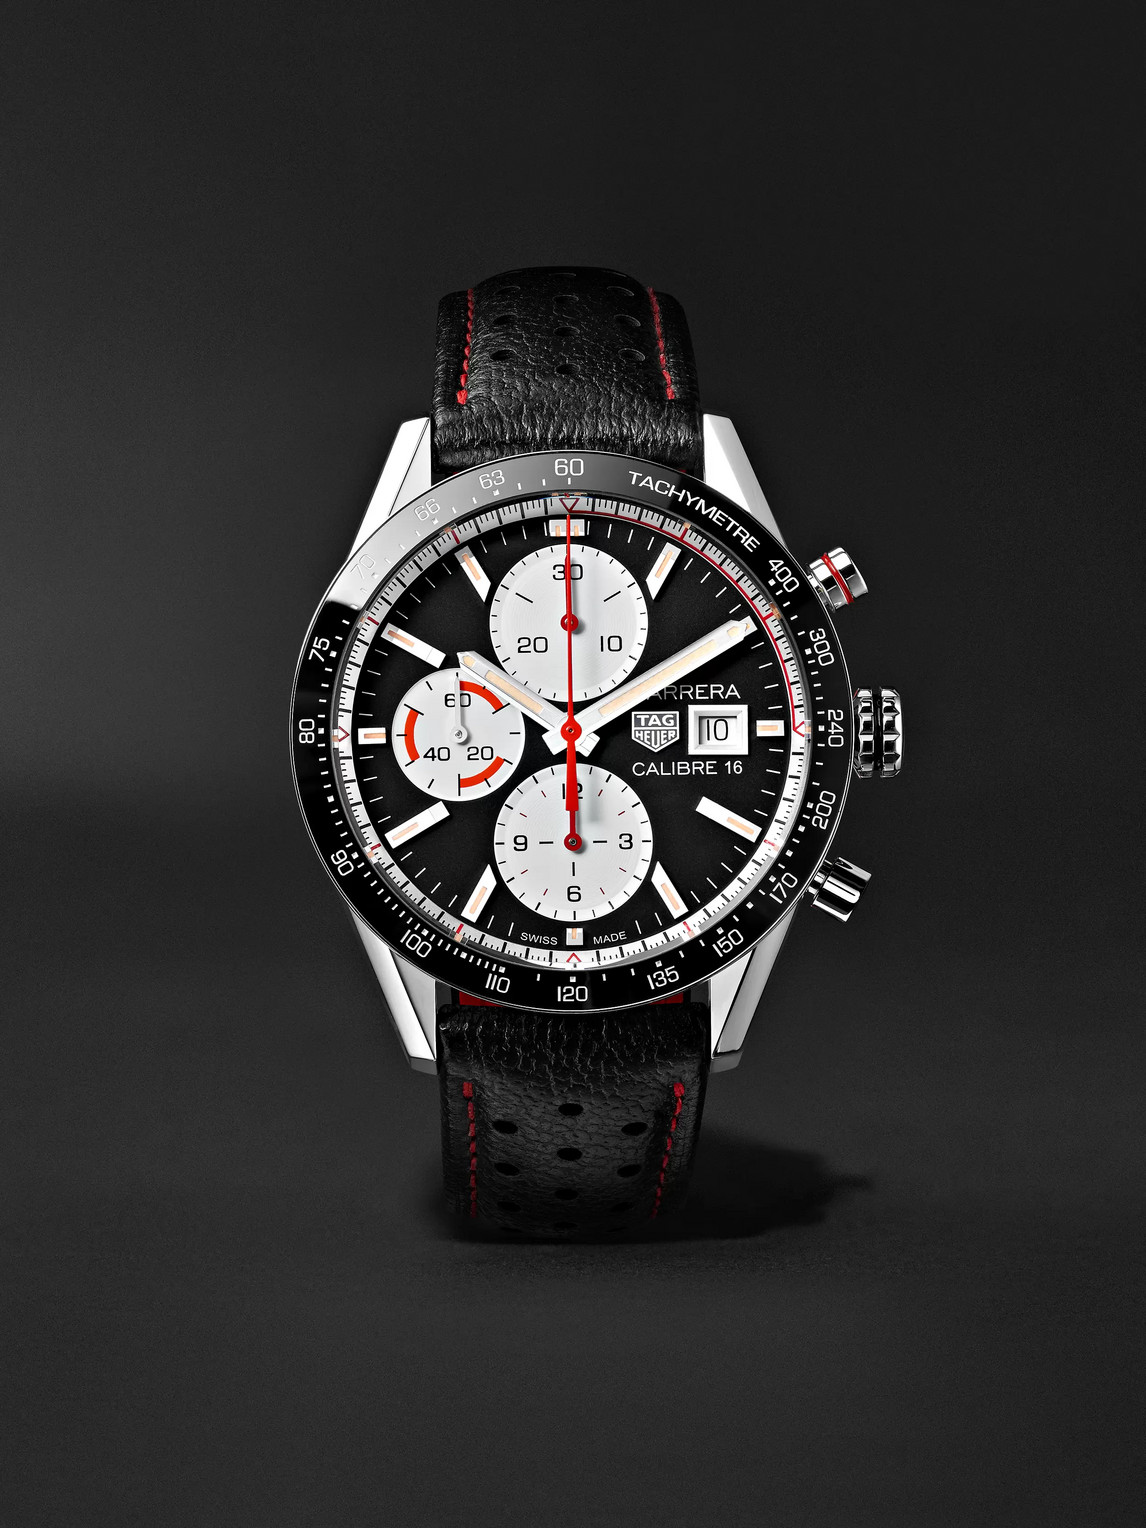 TAG HEUER CARRERA AUTOMATIC CHRONOGRAPH 41MM STEEL AND LEATHER WATCH, REF. NO. CV201AP.FC6429